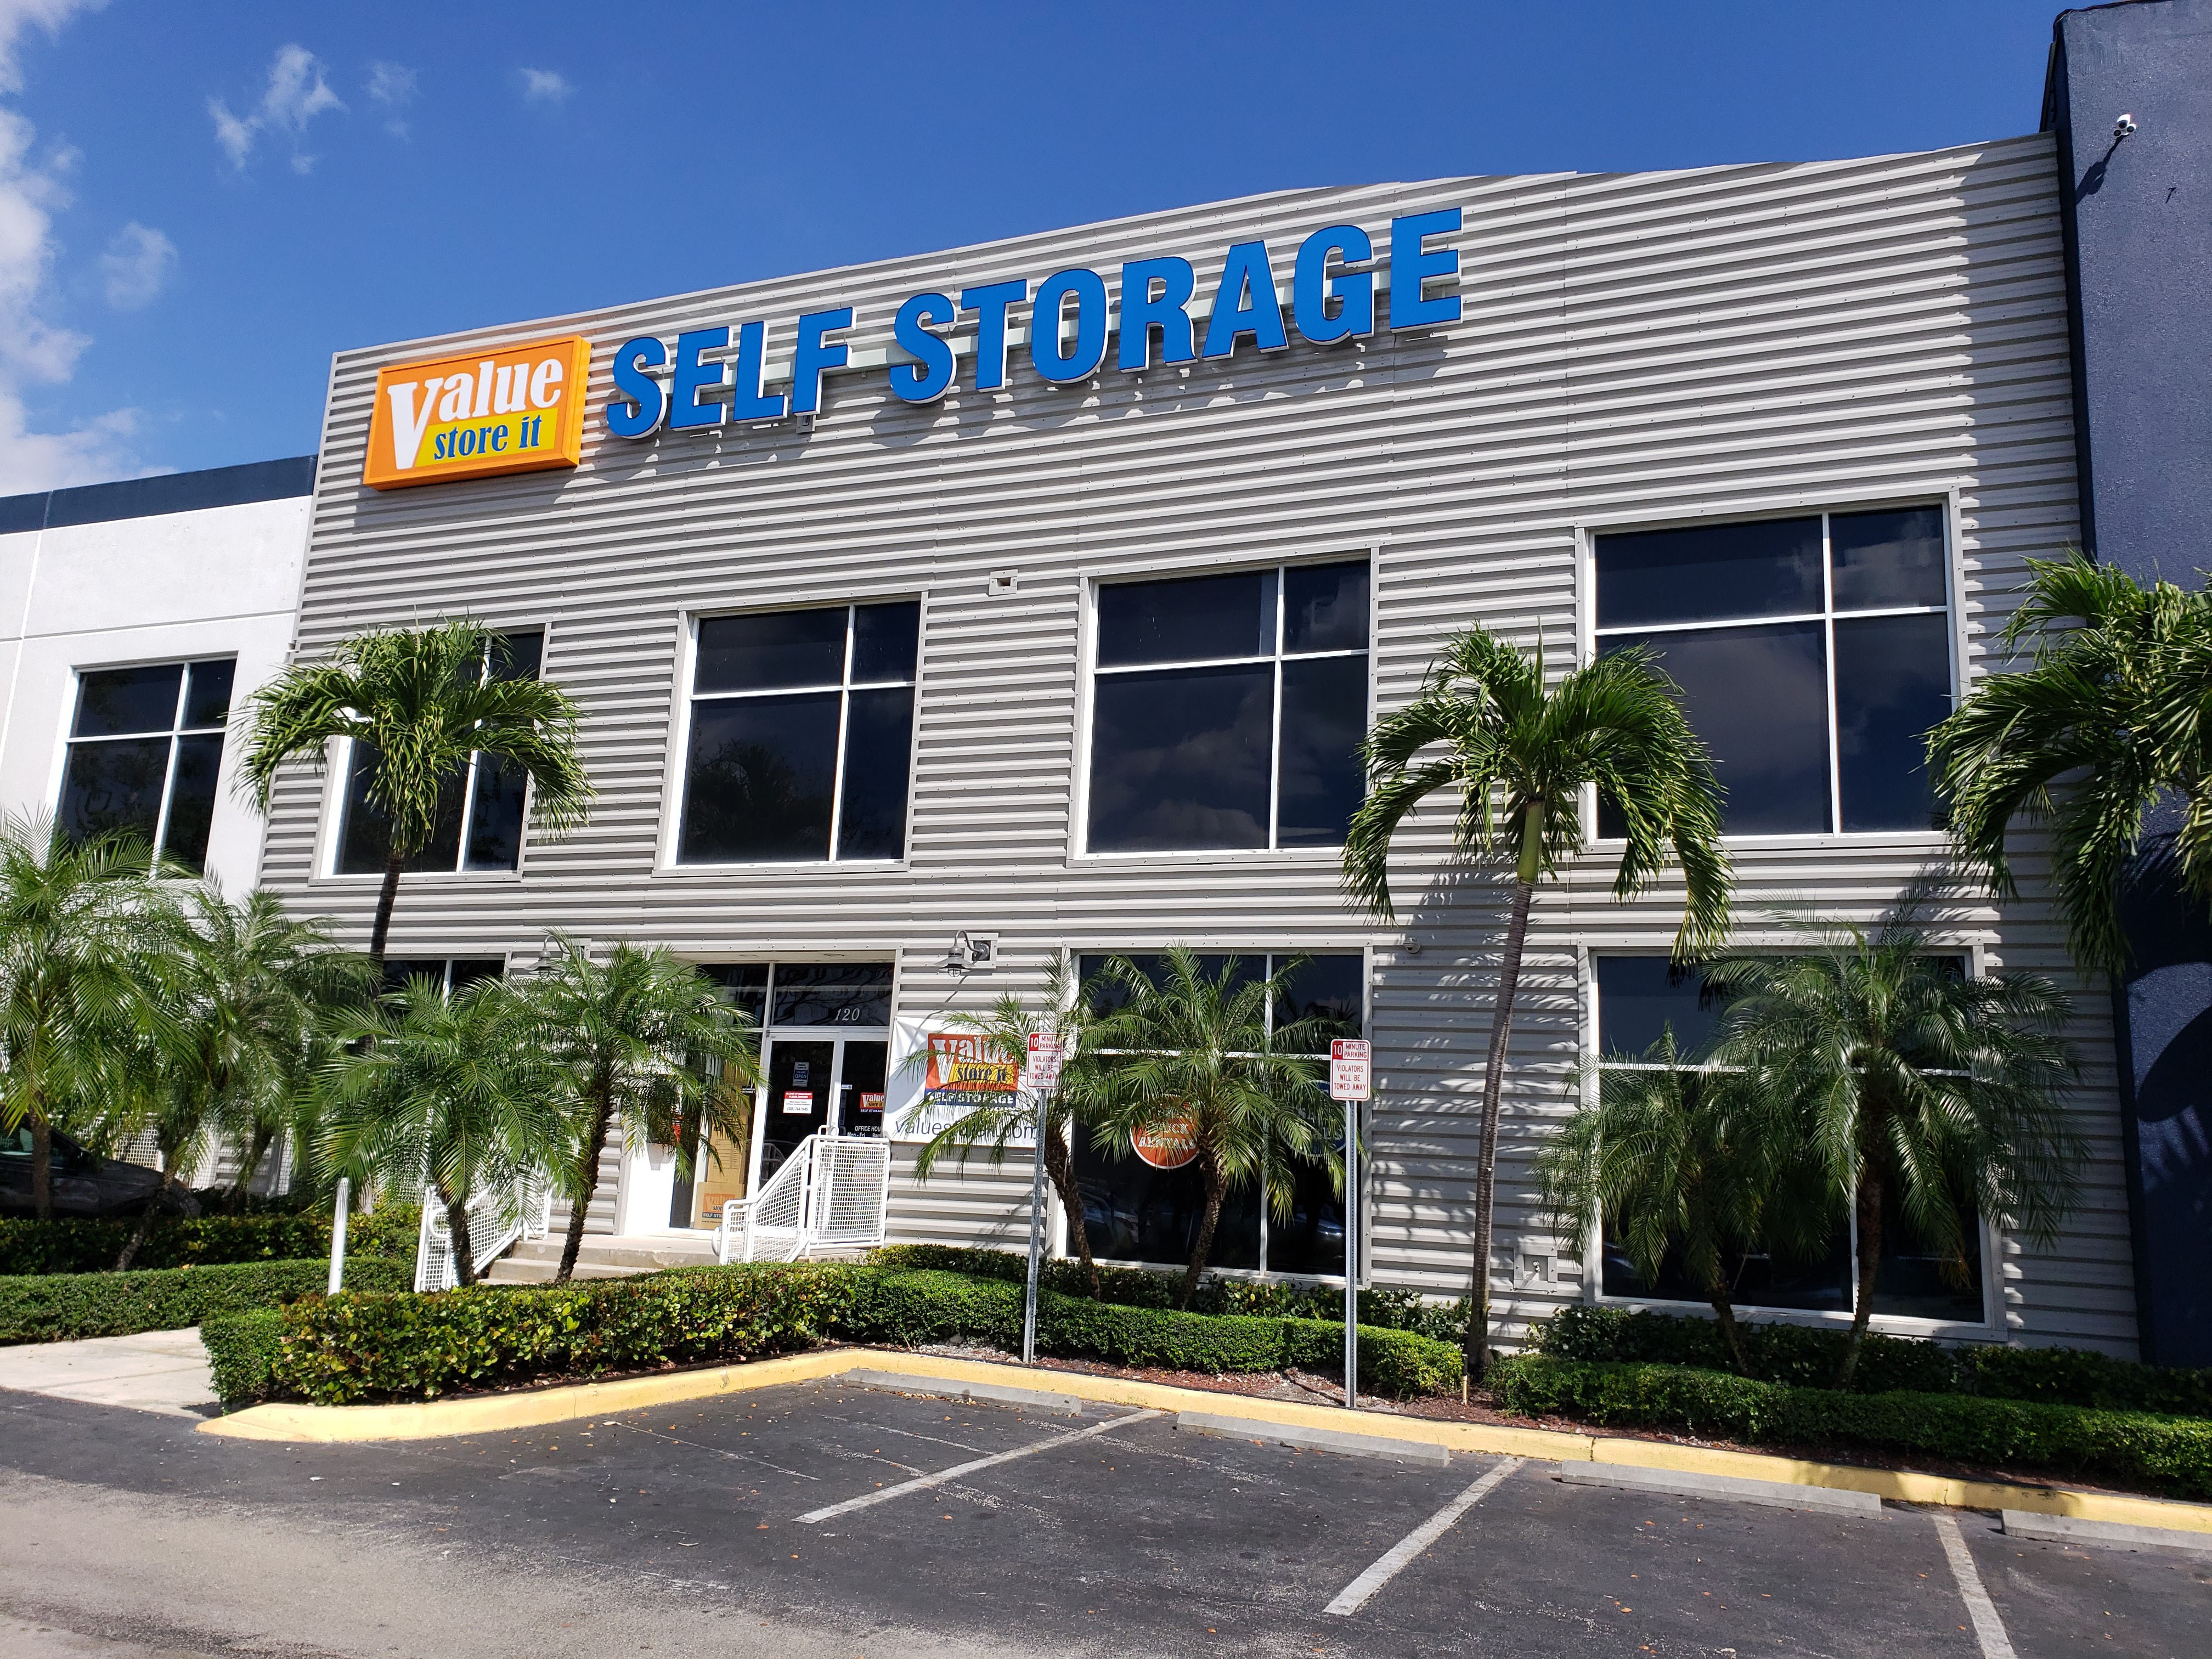 New Value Store It Location in Miami Self Storage Facility in South Florida Now Open!